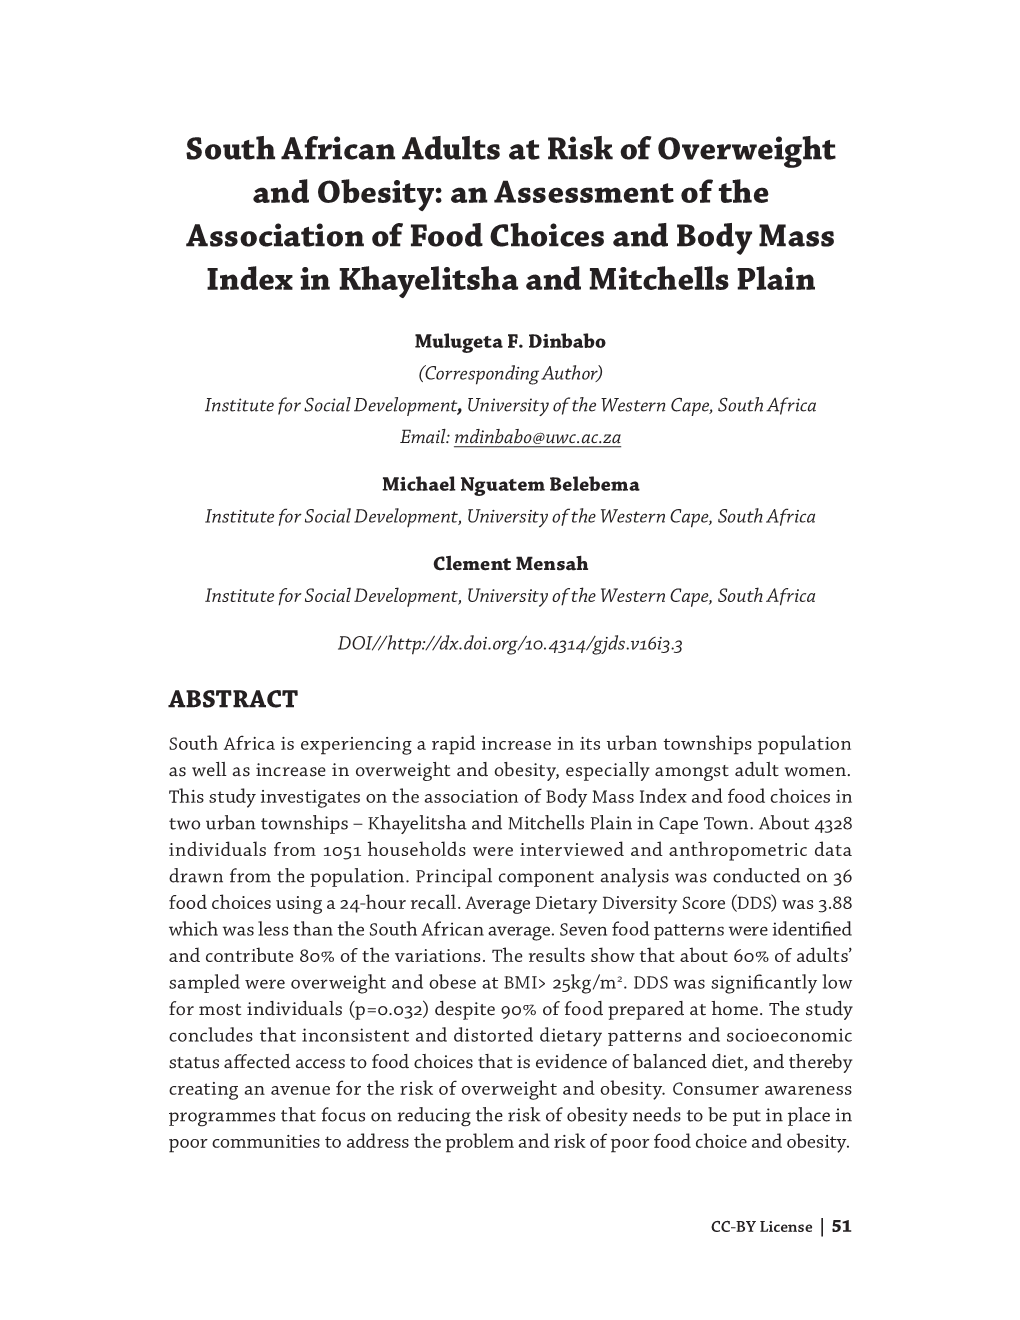 South African Adults at Risk of Overweight and Obesity: an Assessment of the Association of Food Choices and Body Mass Index in Khayelitsha and Mitchells Plain